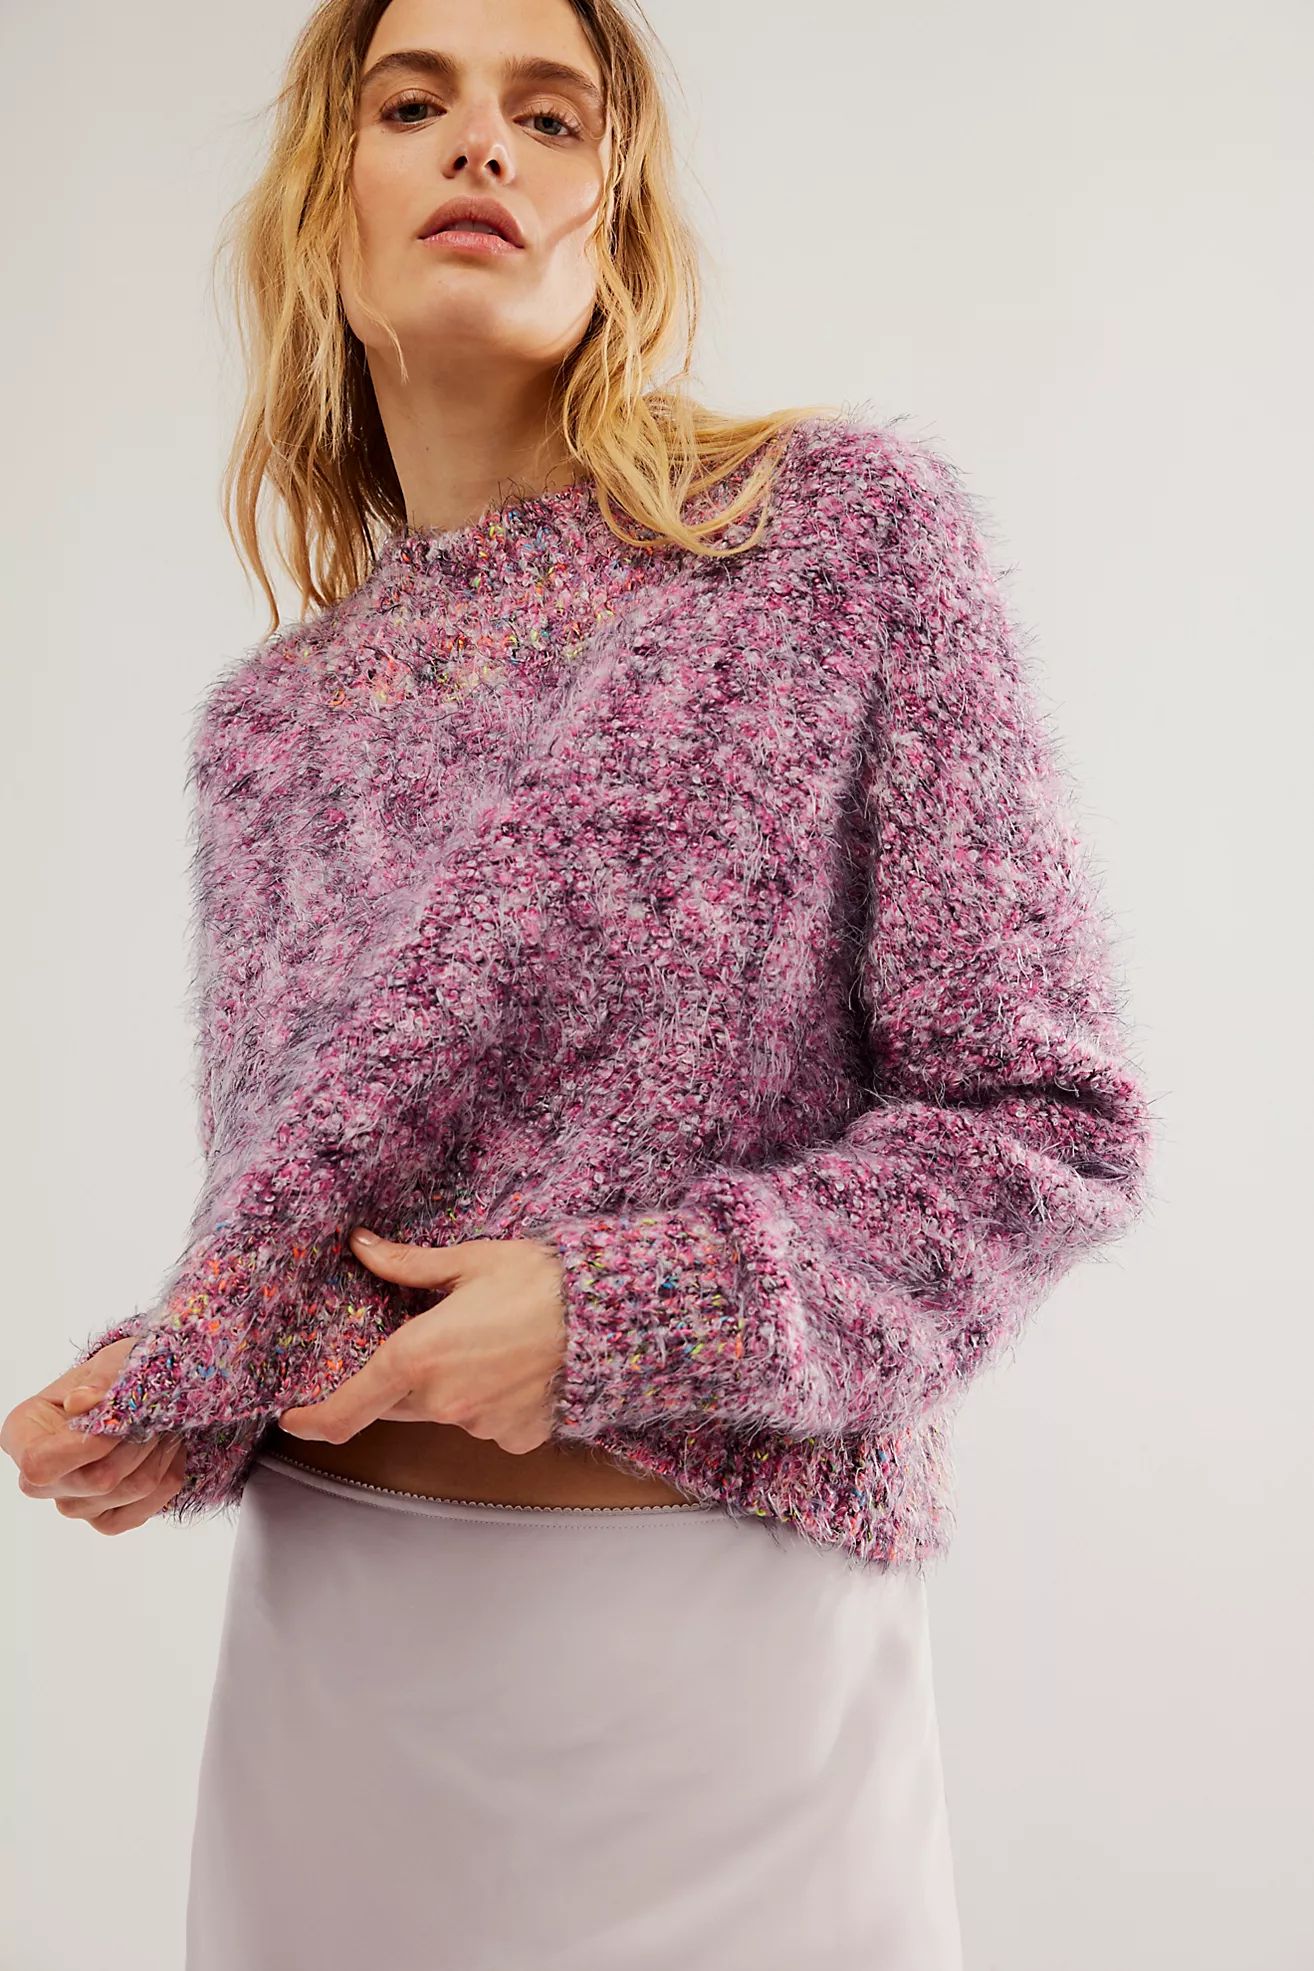 Stardust Pullover | Free People (Global - UK&FR Excluded)